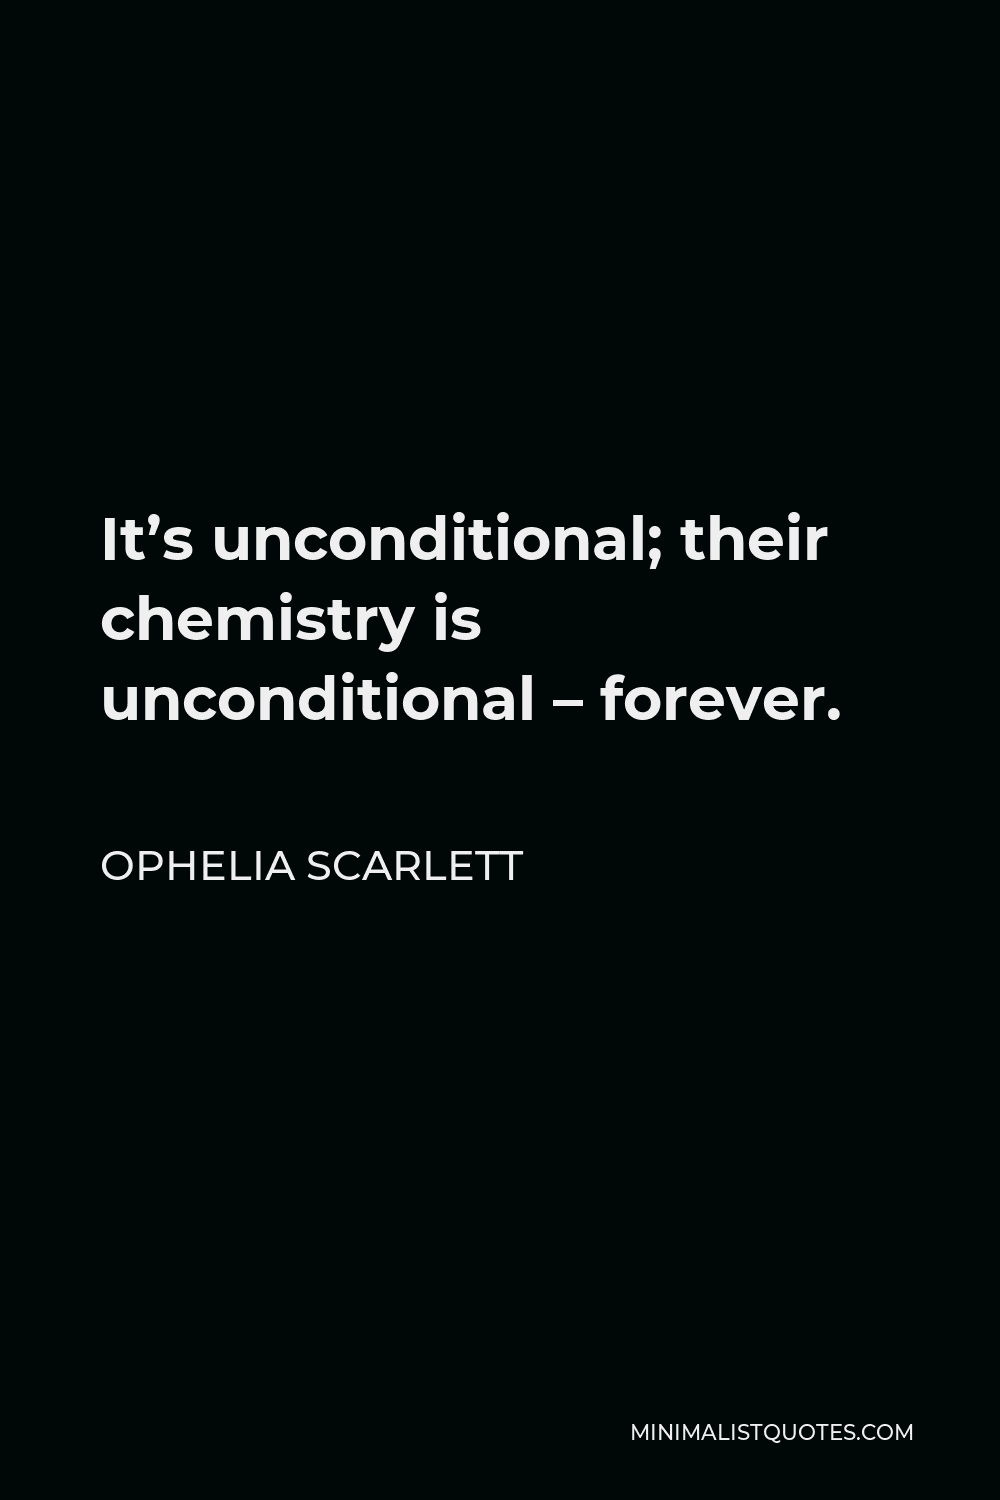 Ophelia Scarlett Quote - It’s unconditional; their chemistry is unconditional – forever.